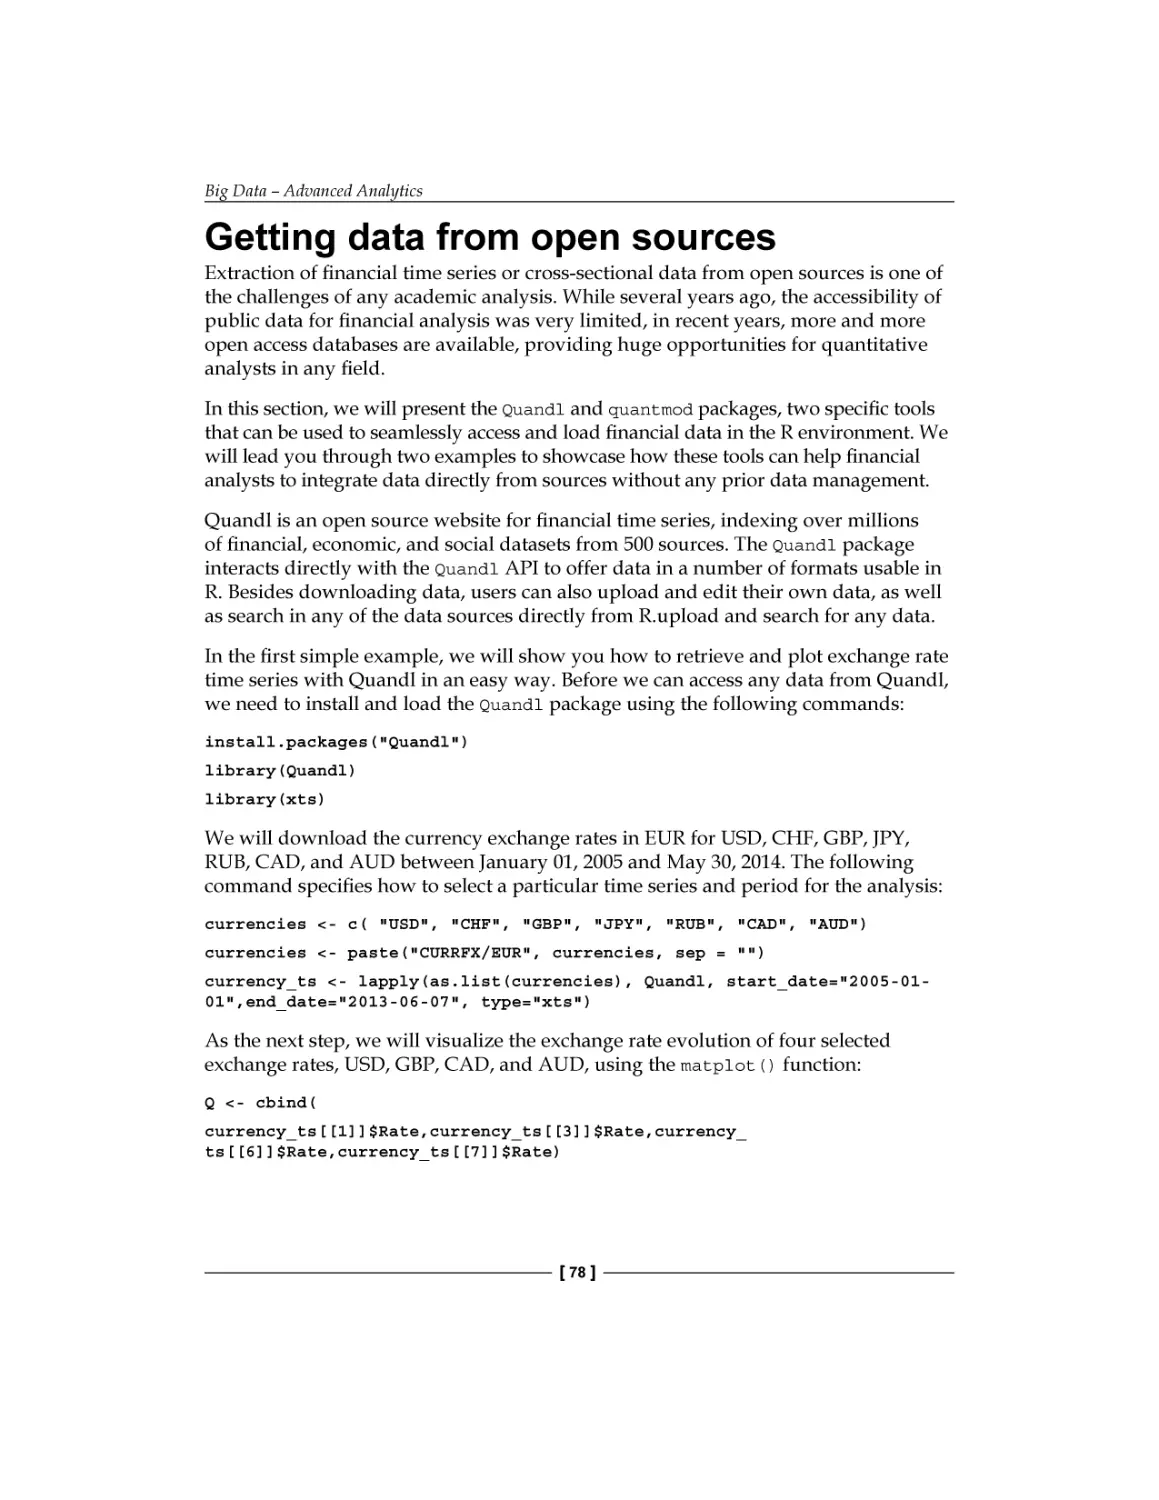 Getting data from open sources